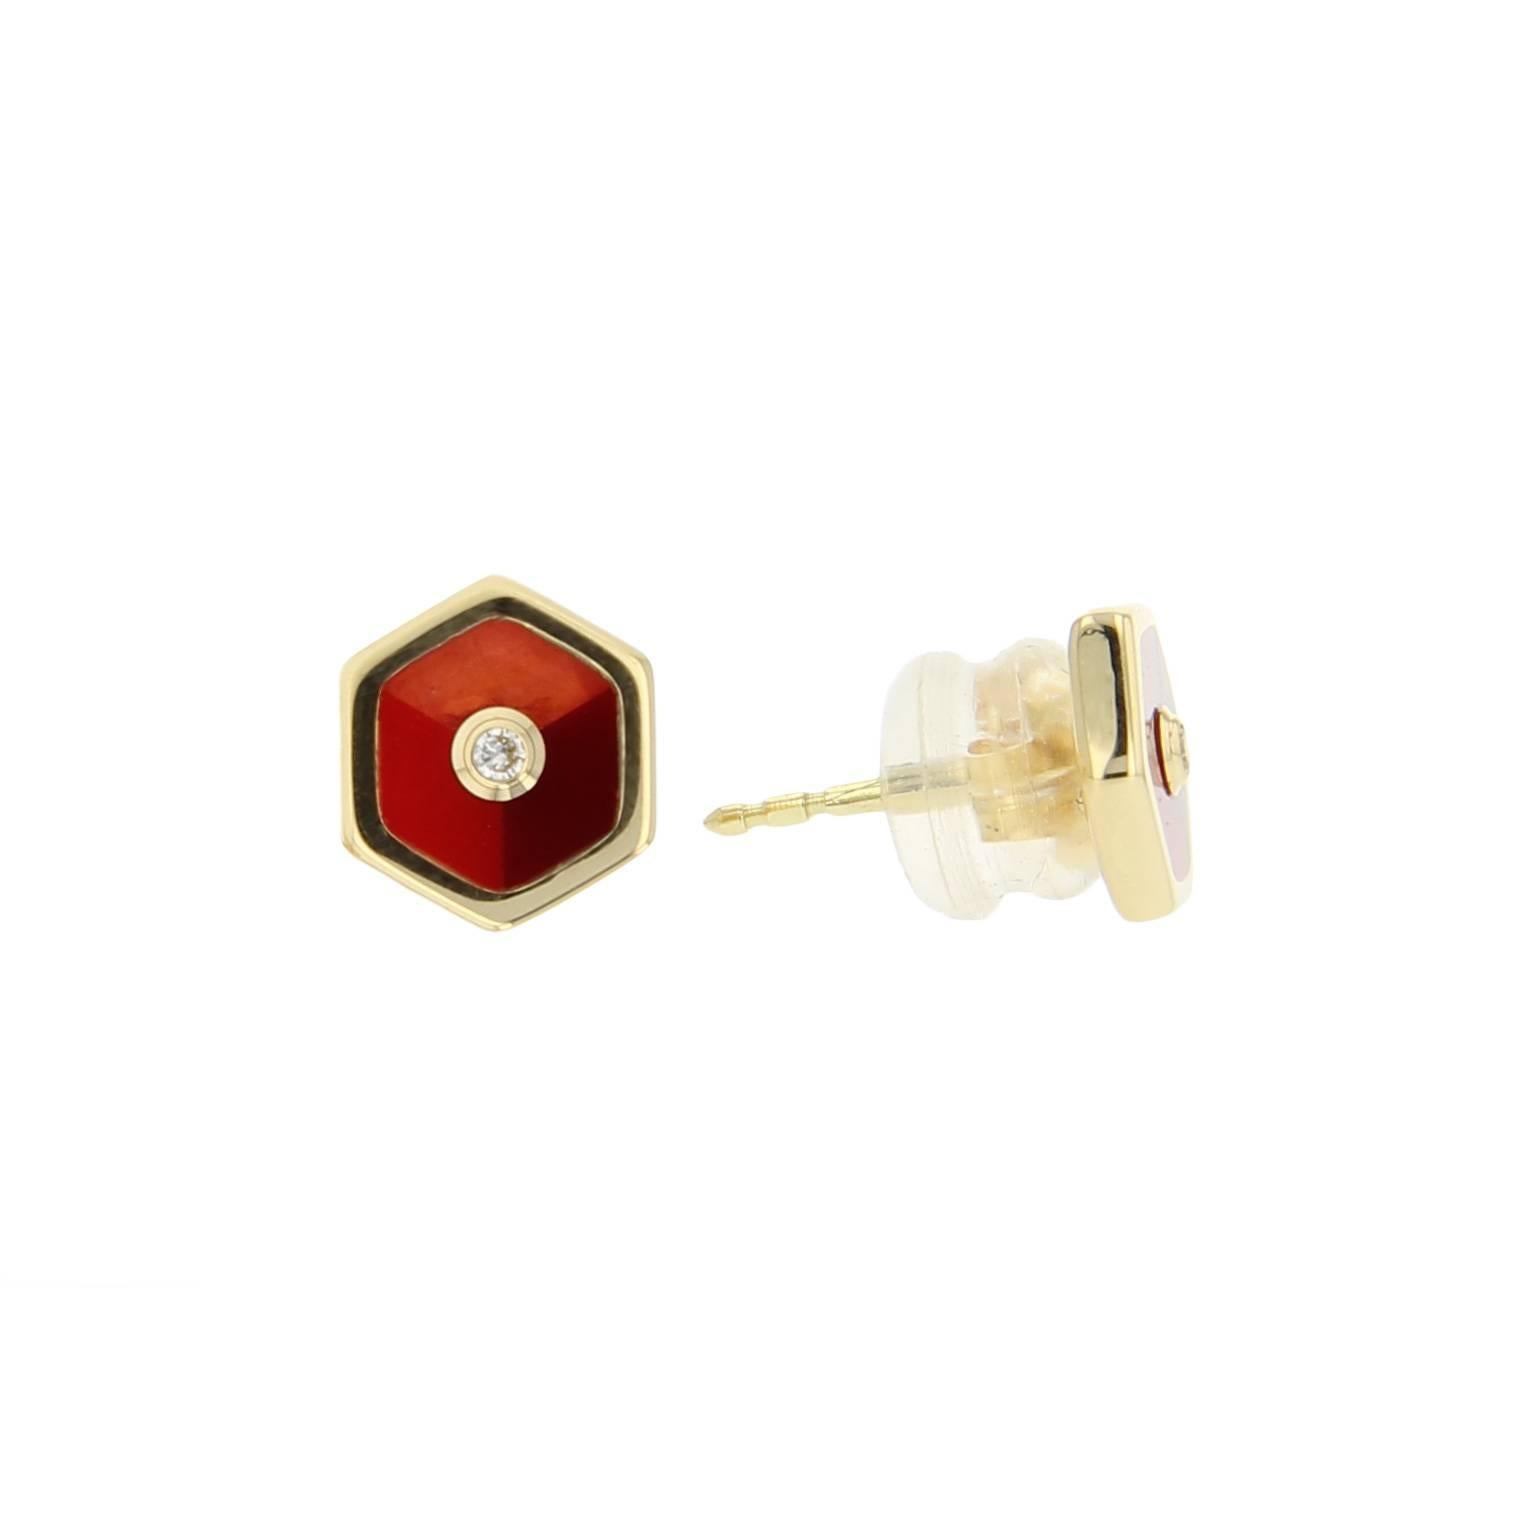 These petite hexagonal stud earrings are handcrafted with a mosaic of red, pink and burgundy bakelite and set in polished 18k yellow gold. At the center are gorgeous fine diamonds bezel set in 18k yellow gold. 

Full details below:
• From the Mark